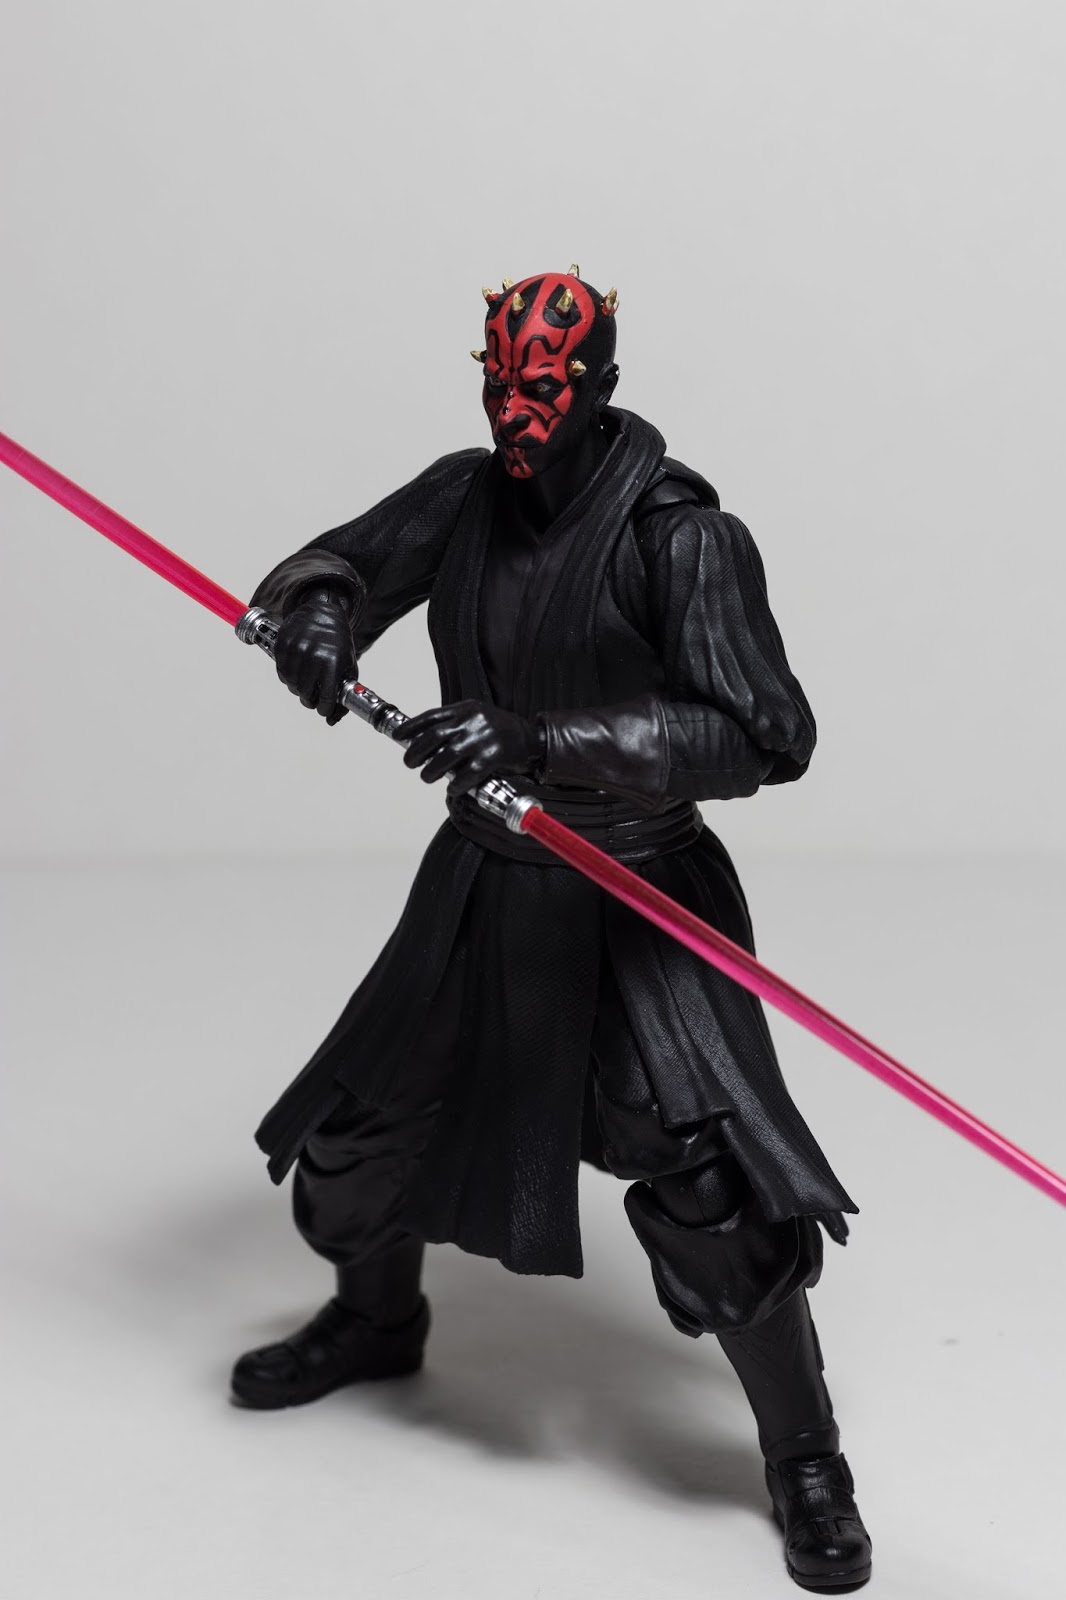 Doons Dungeon: 1/12 S.H.Figuarts Darth Maul Action Figure review